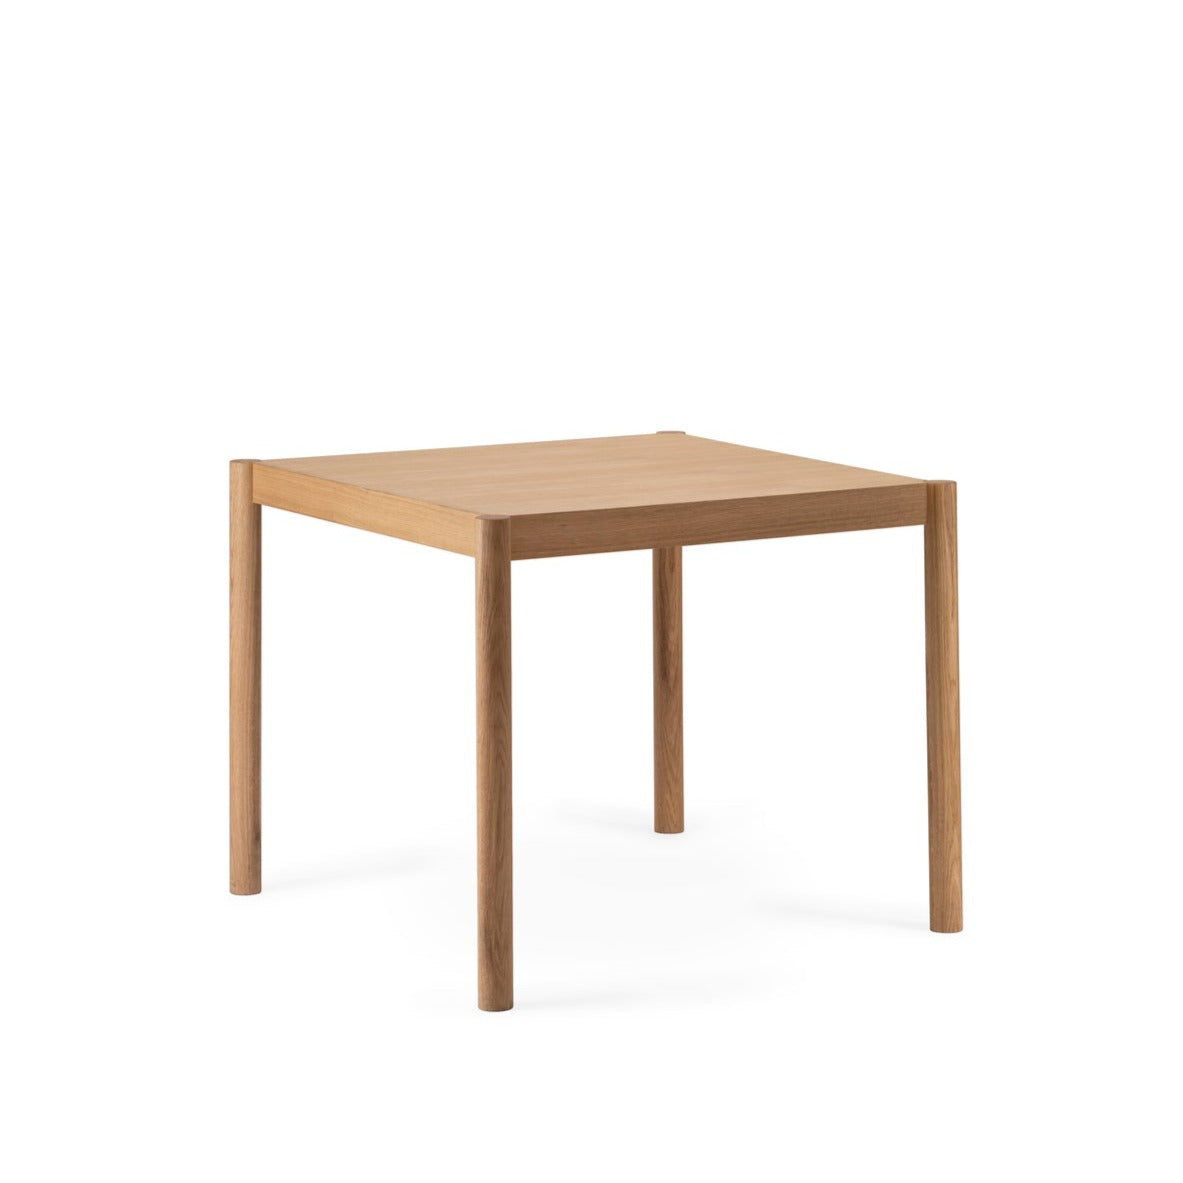 CITIZEN Dining Table-natural oak-small size side view